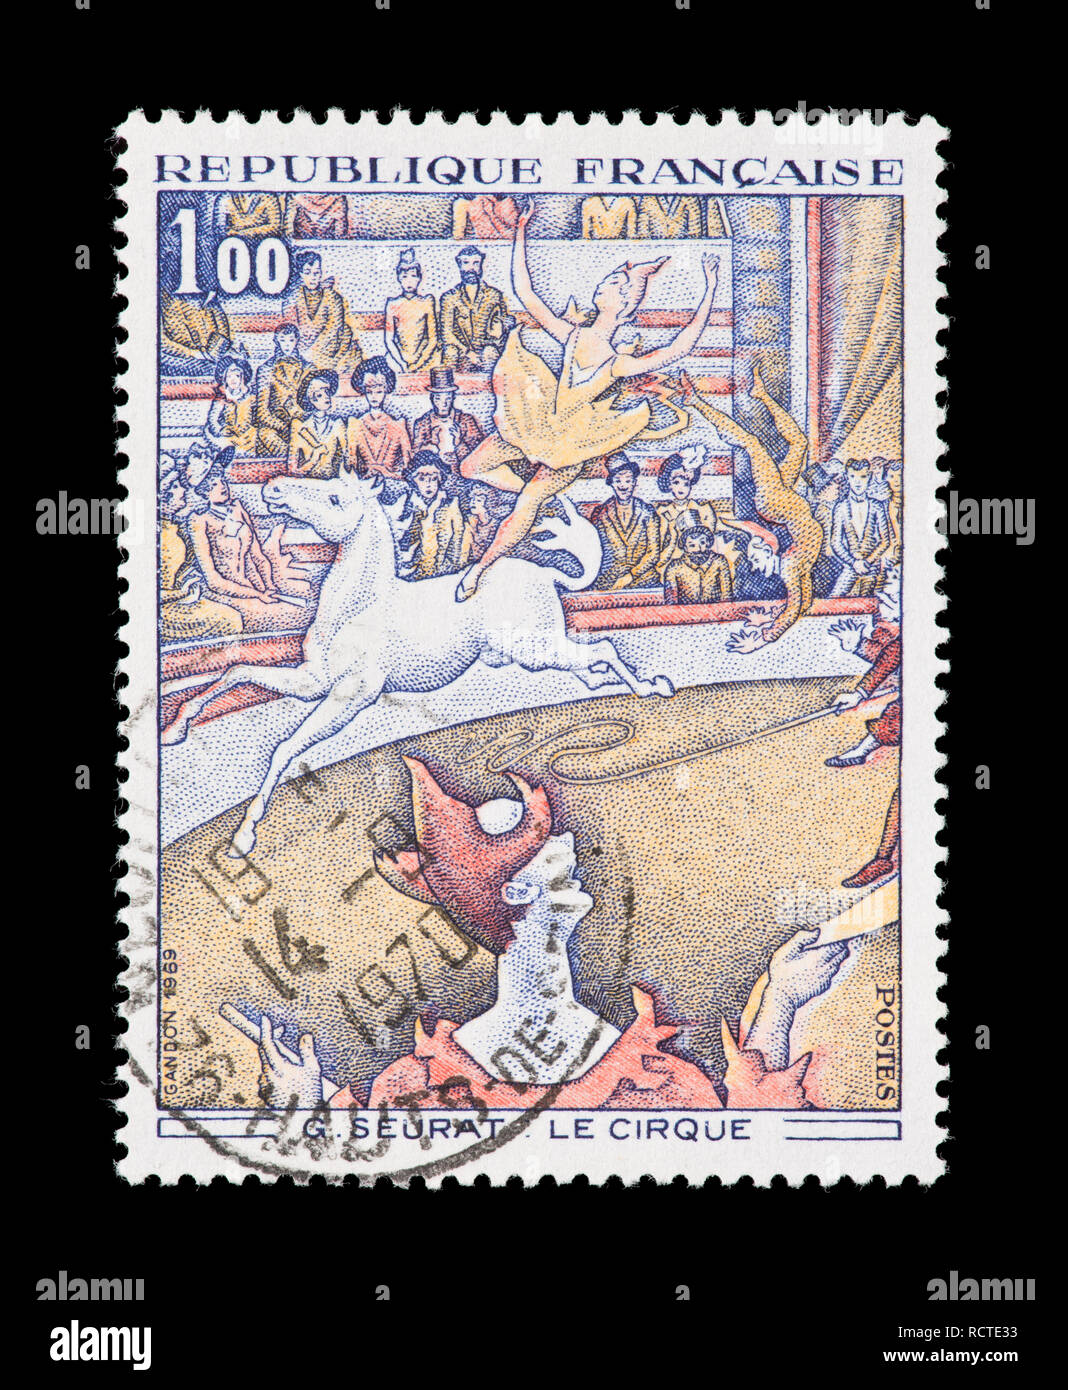 Postage stamp from France depicting the Georges Seurat The Circus Stock Photo